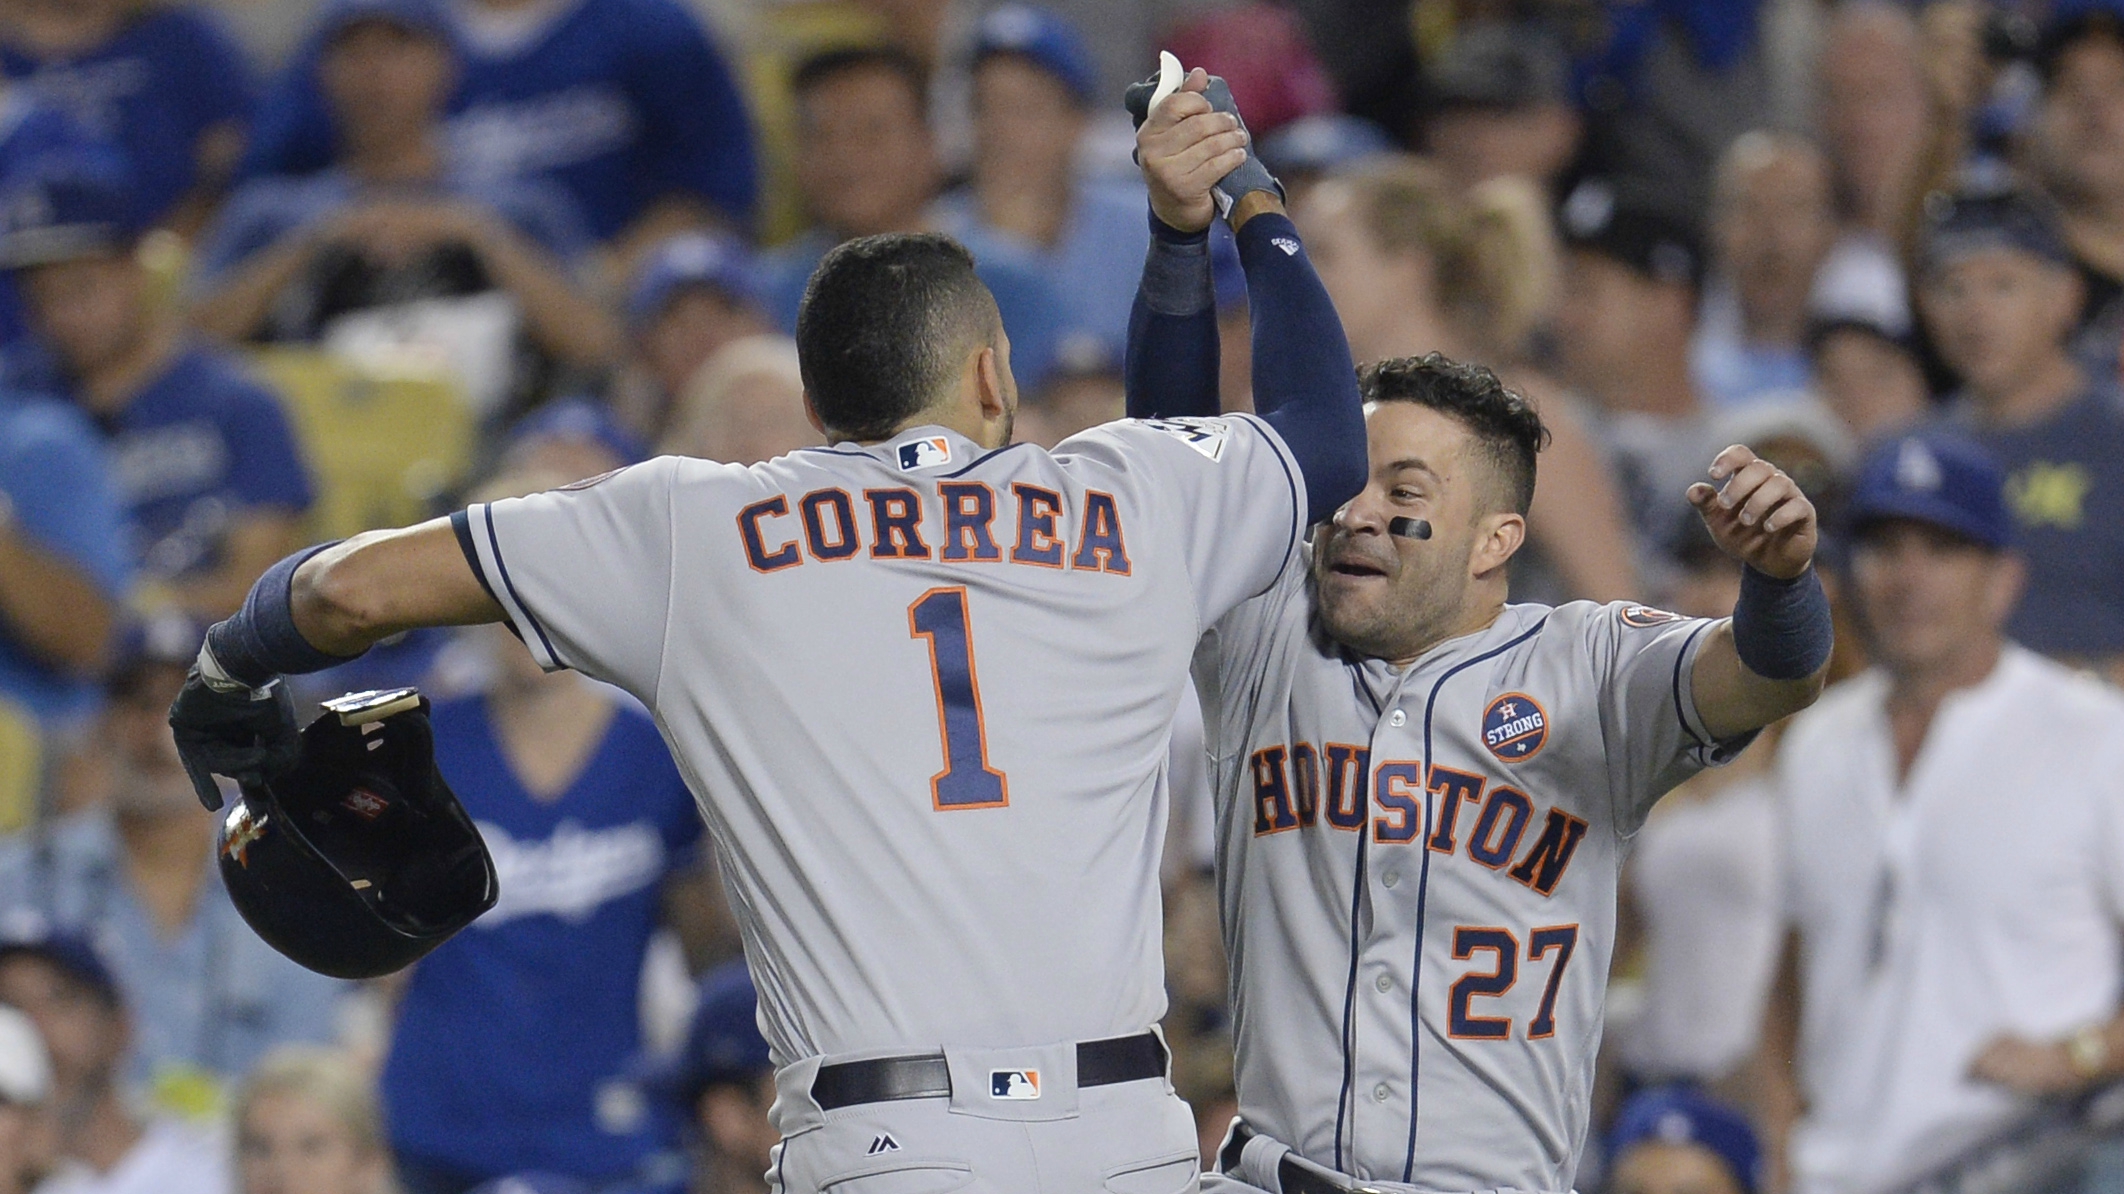 Astros come back to win Game 2 in extra innings, tie World Series